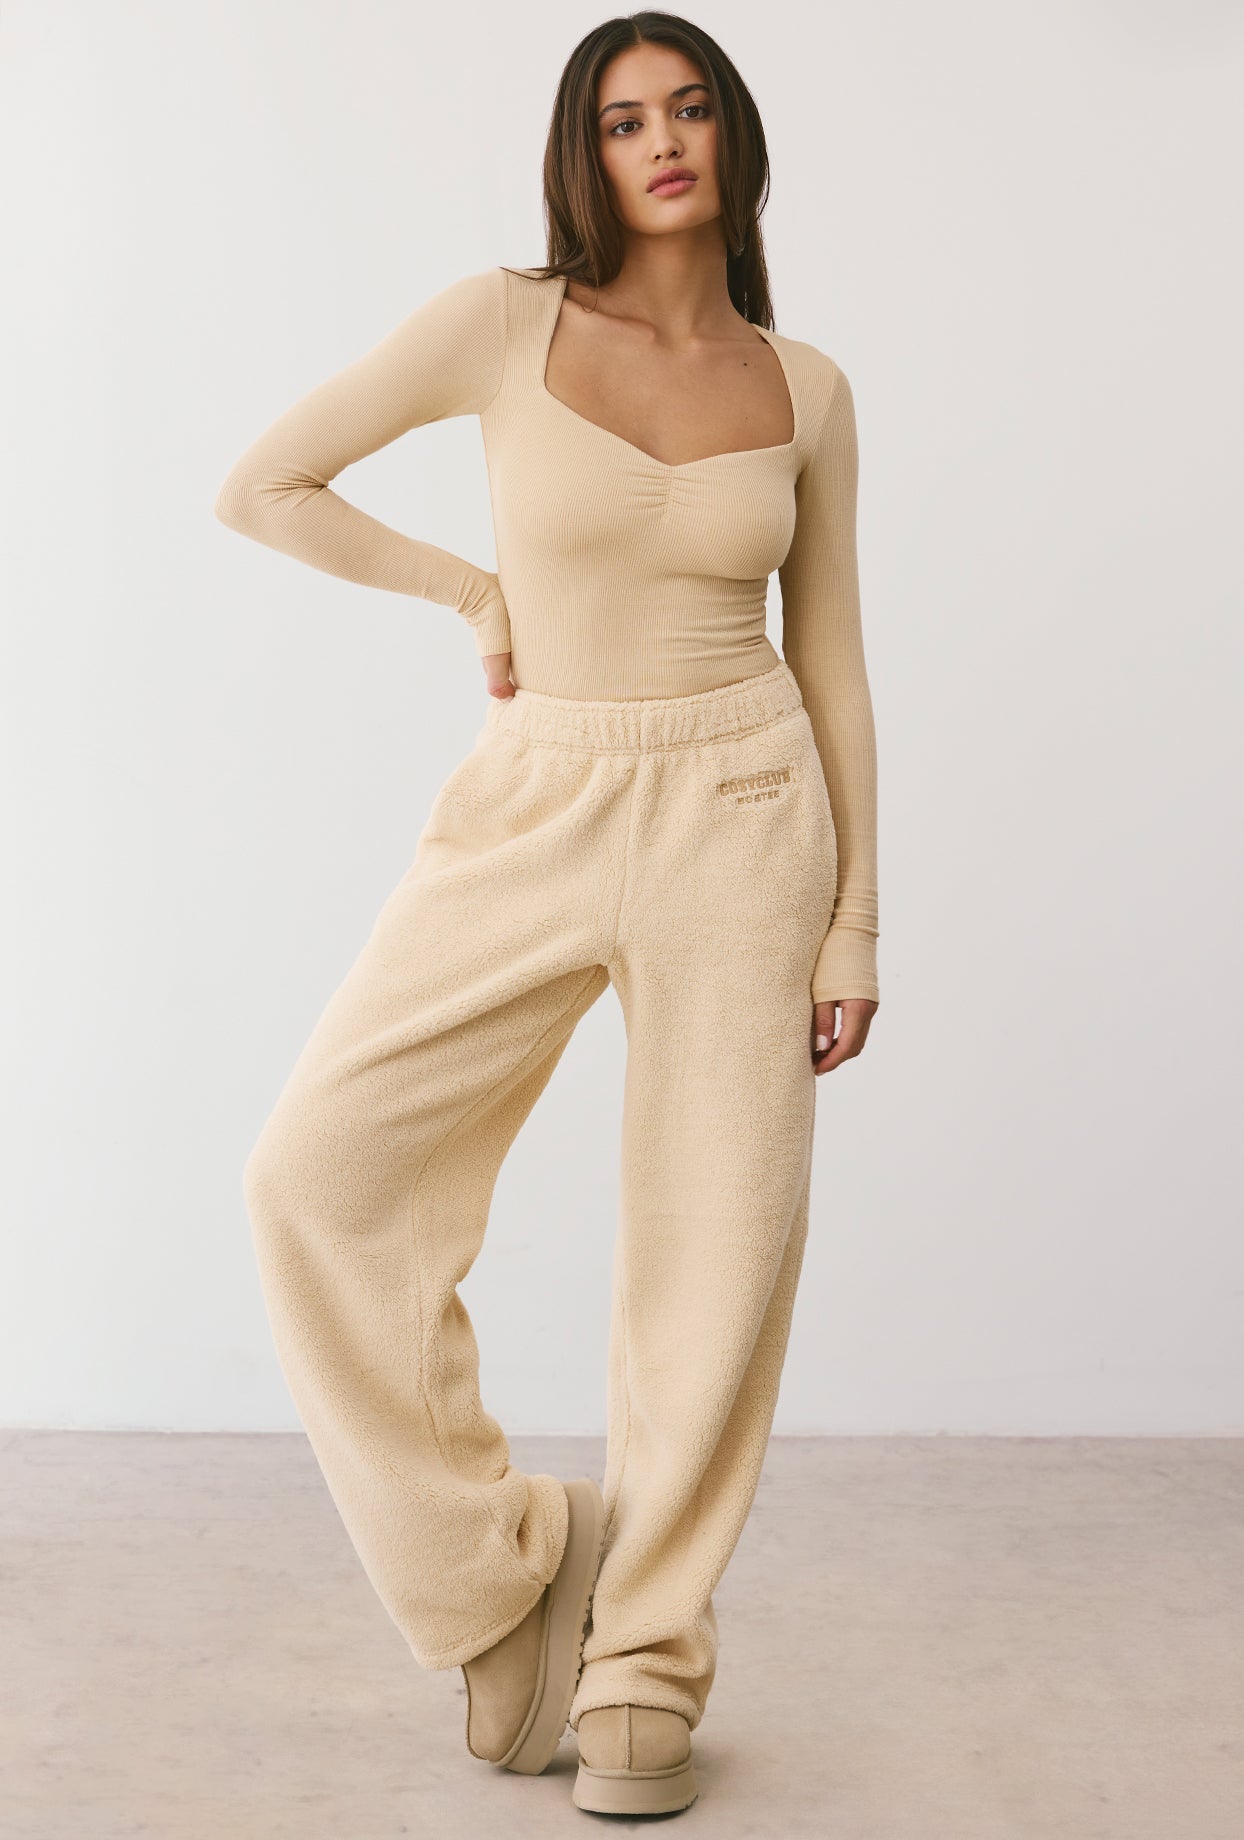 Modal Rib Long Sleeve Crop Top in Cashmere